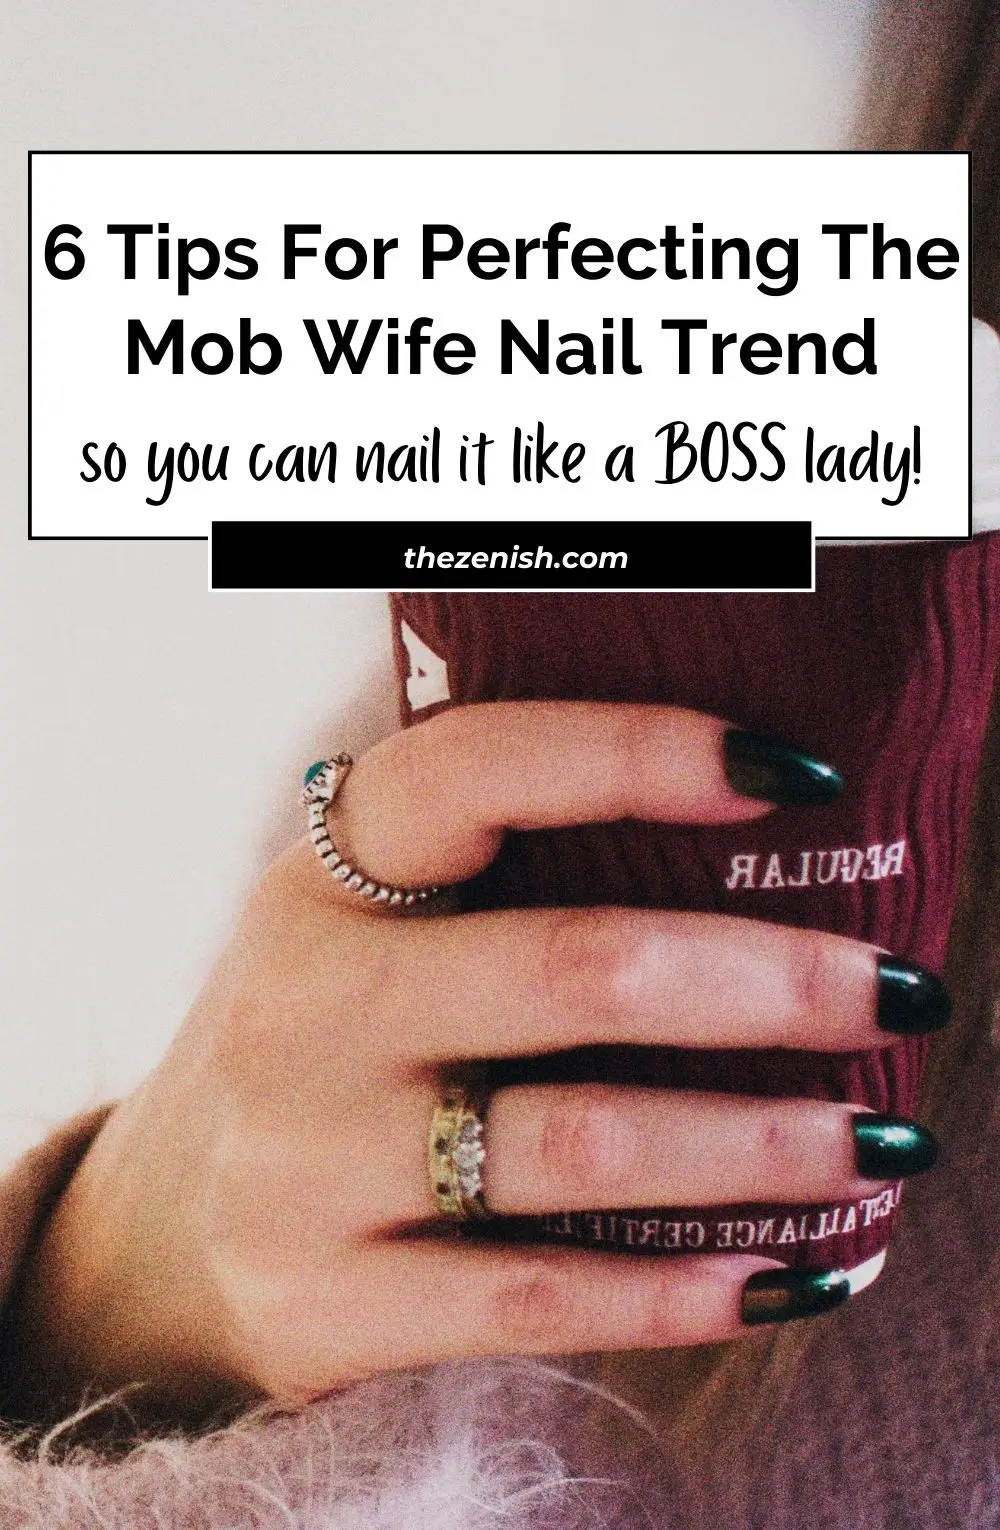 6 Tips for Perfecting the 'Mob Wife' Nails Trend That's Taking Over Social Media 4 6 Tips for Perfecting the 'Mob Wife' Nails Trend That's Taking Over Social Media